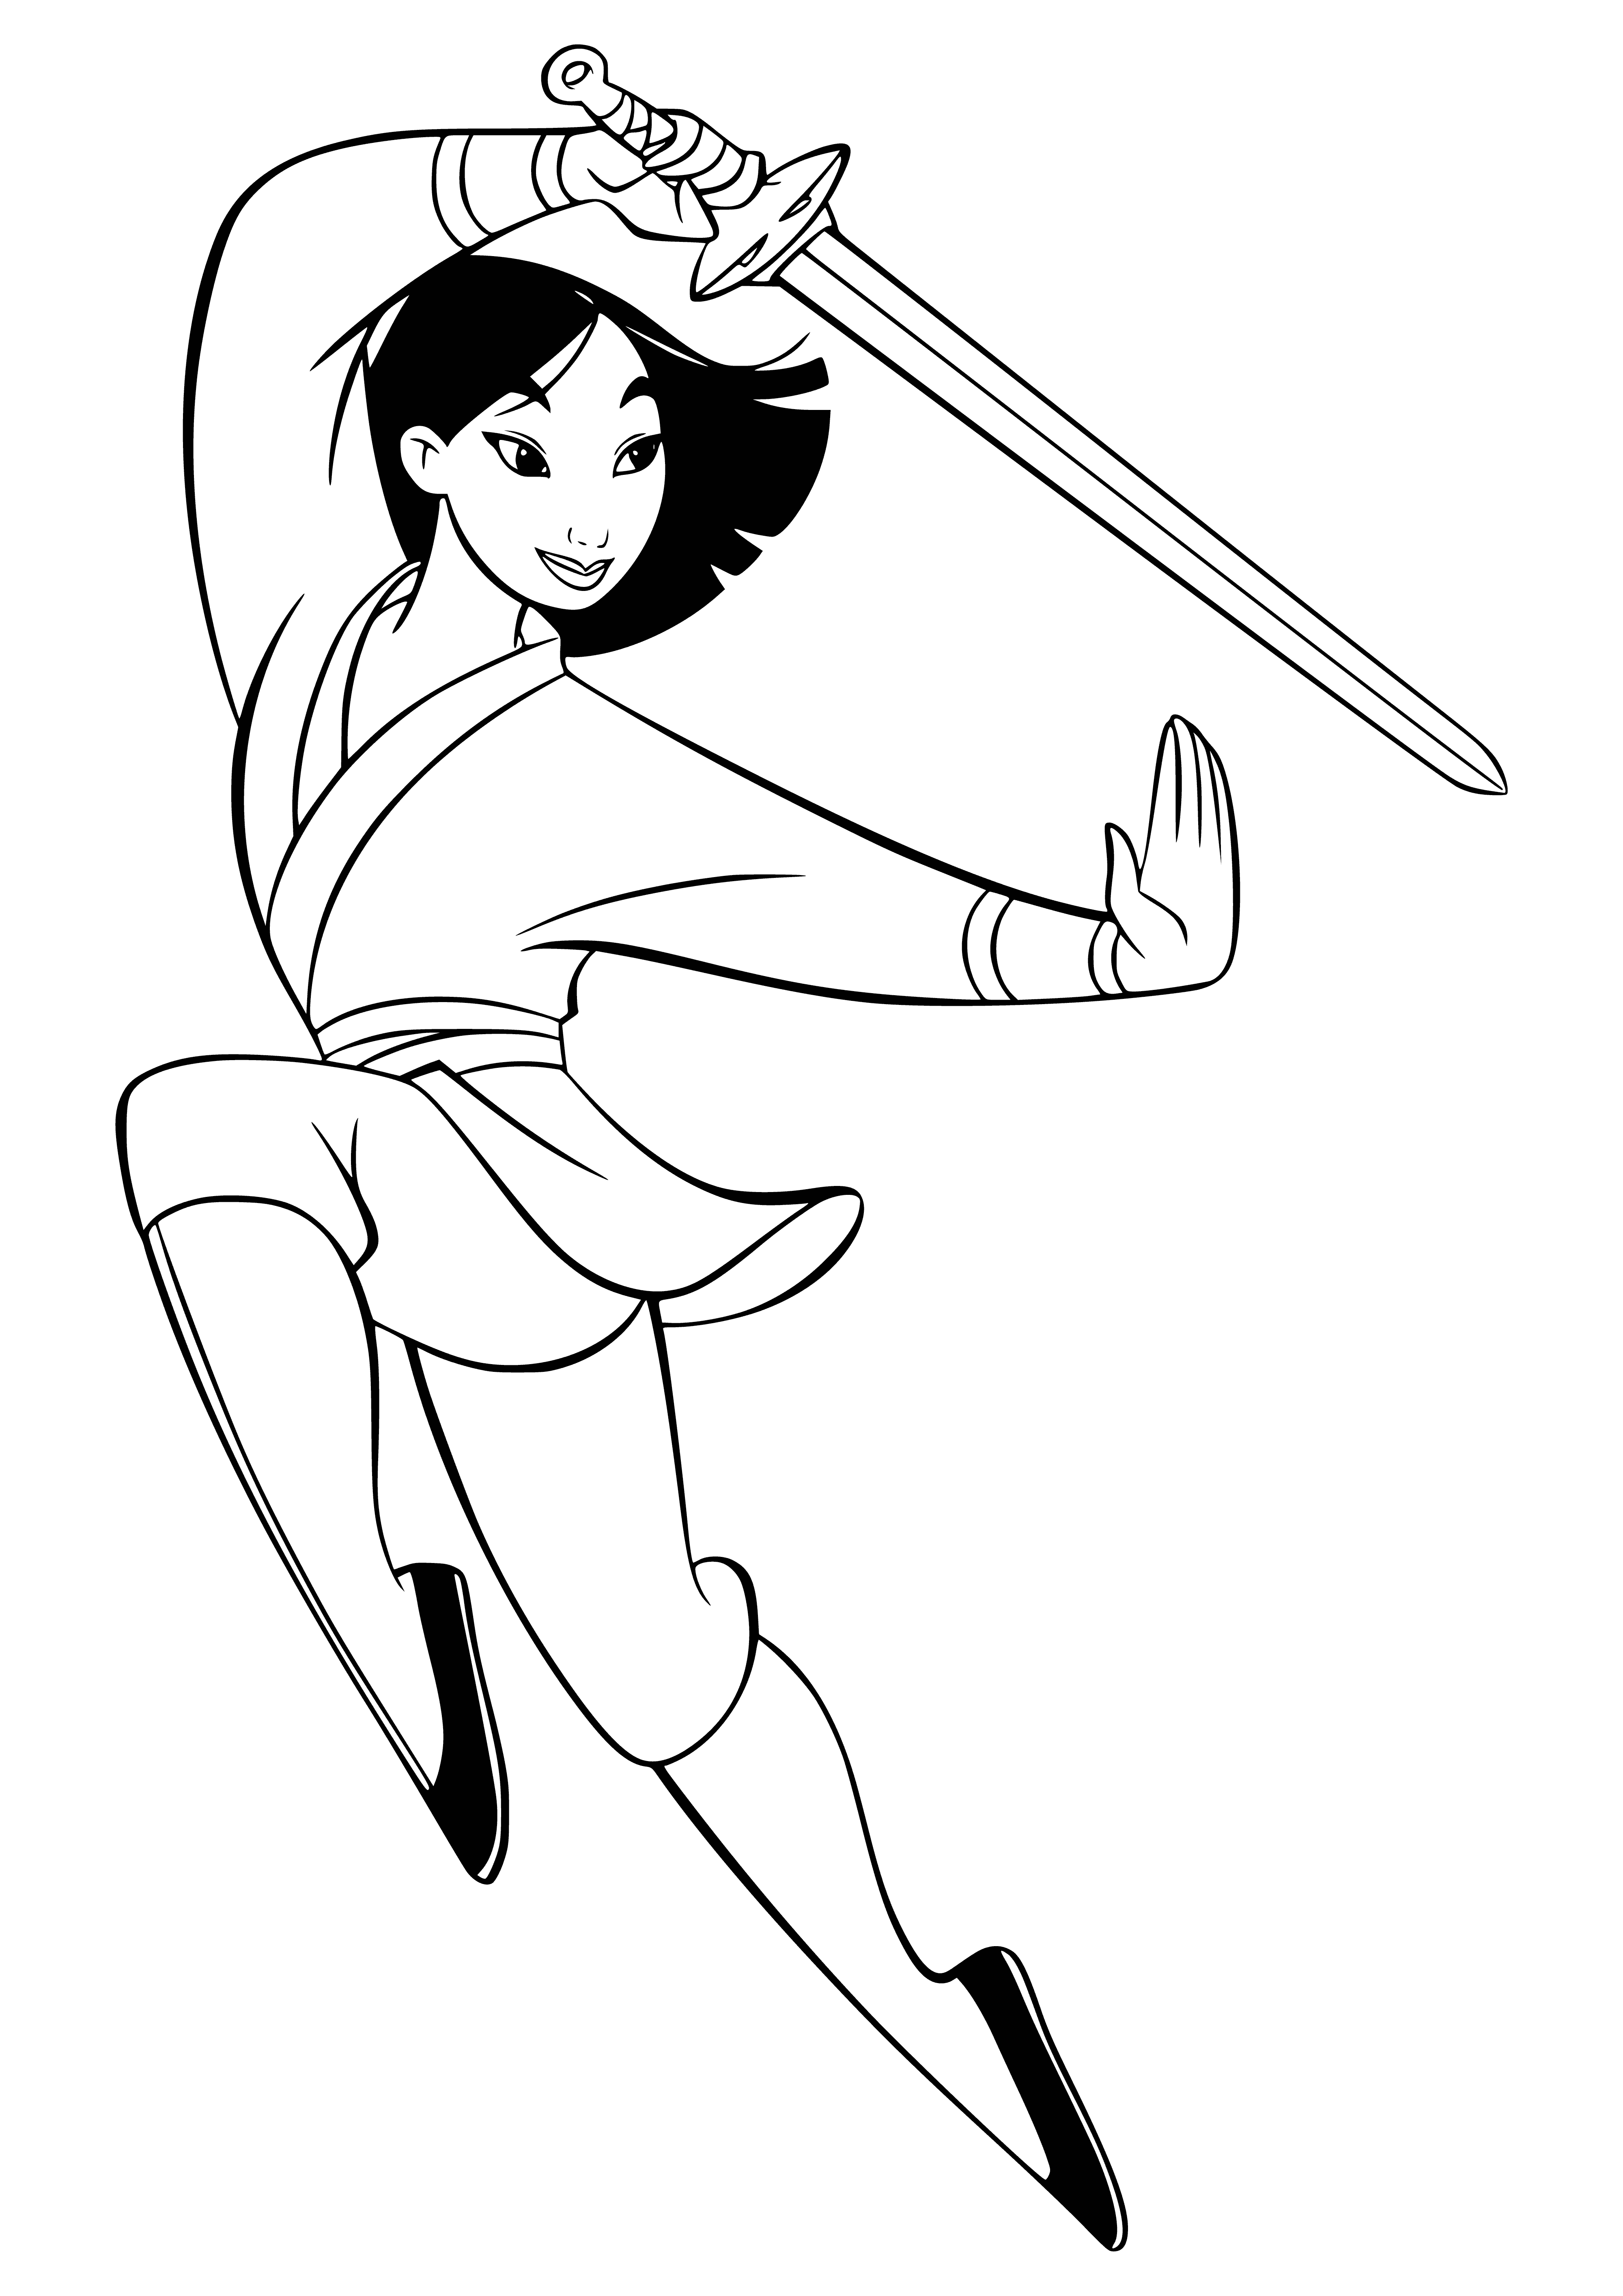 Mulan with a sword coloring page